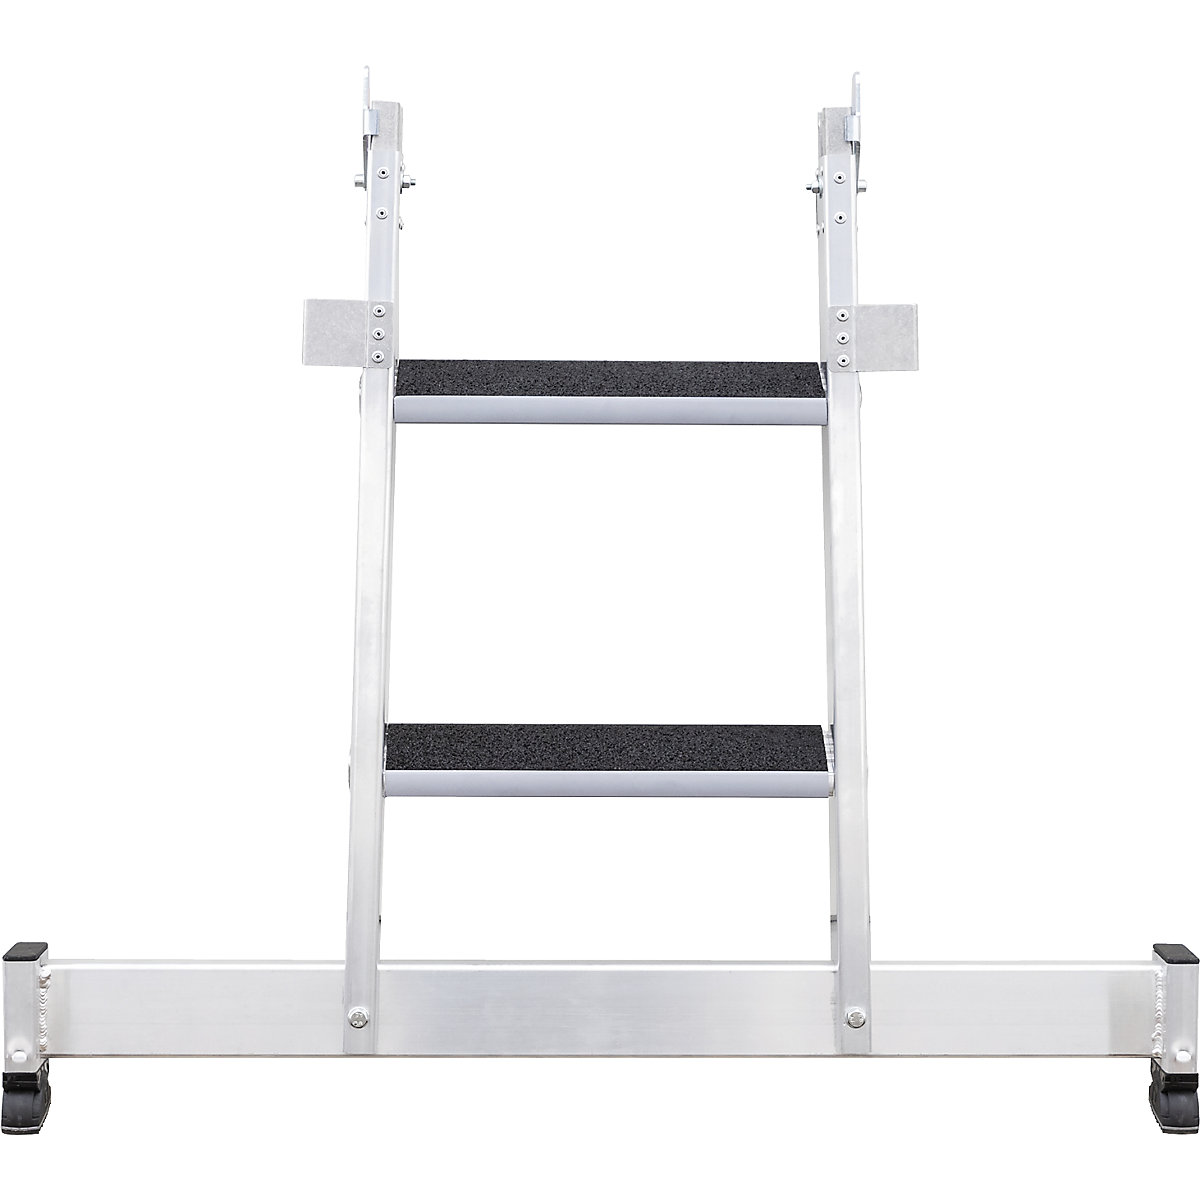 Glass cleaner step ladder – MUNK, components of bottom section, 2 steps, with tread cover, 2+ items-4